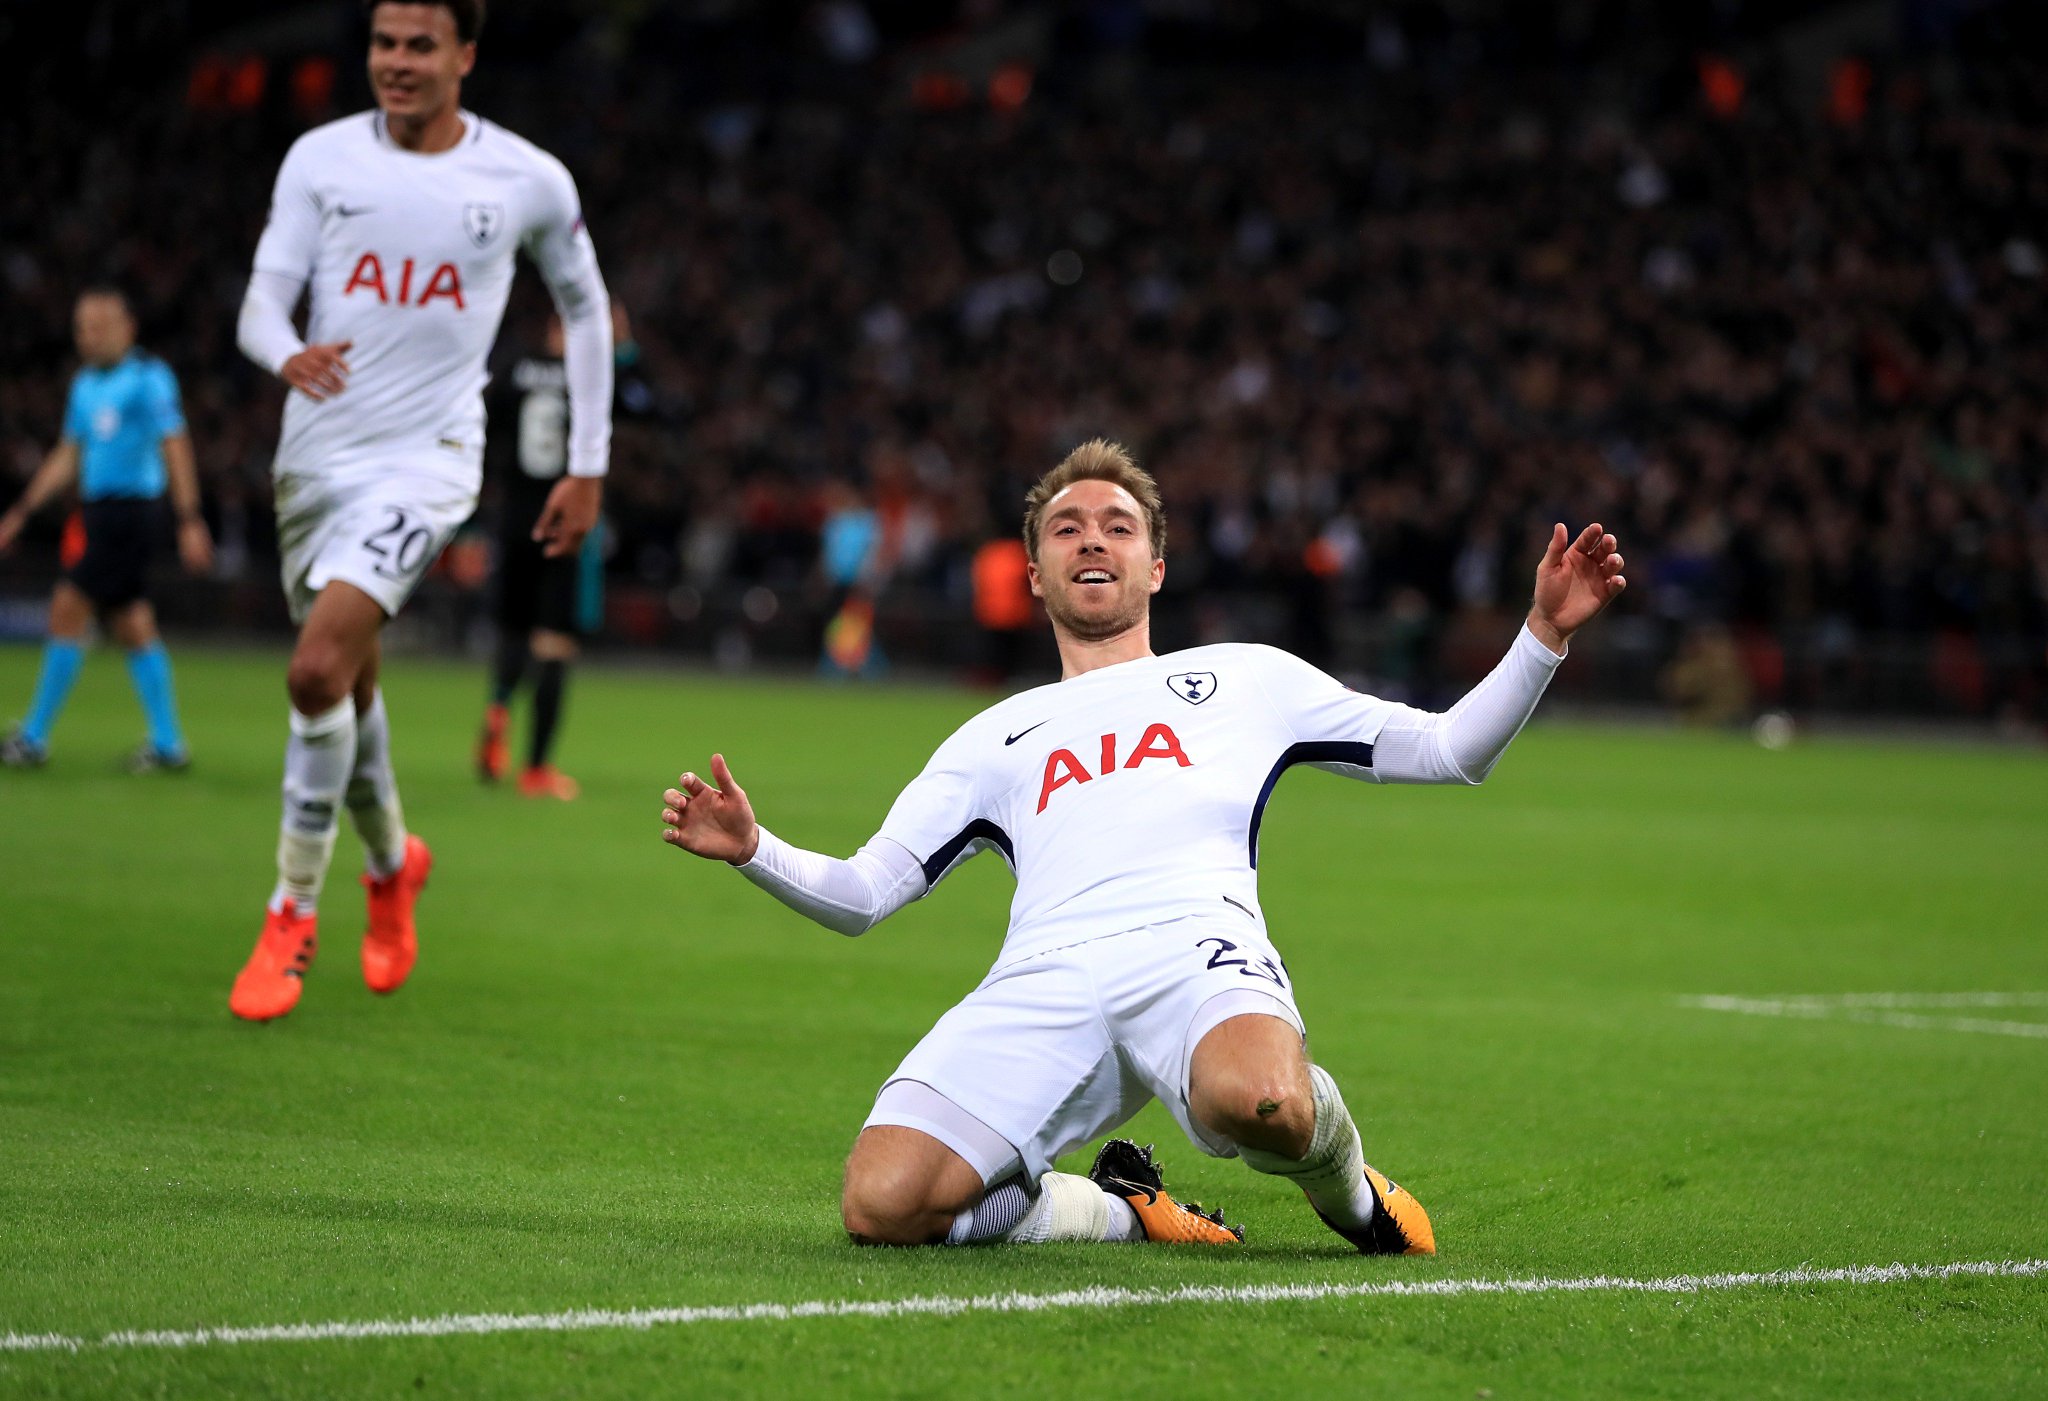 Happy birthday, Christian Eriksen! Who thinks his goal last night could be the difference in the tie...?! 